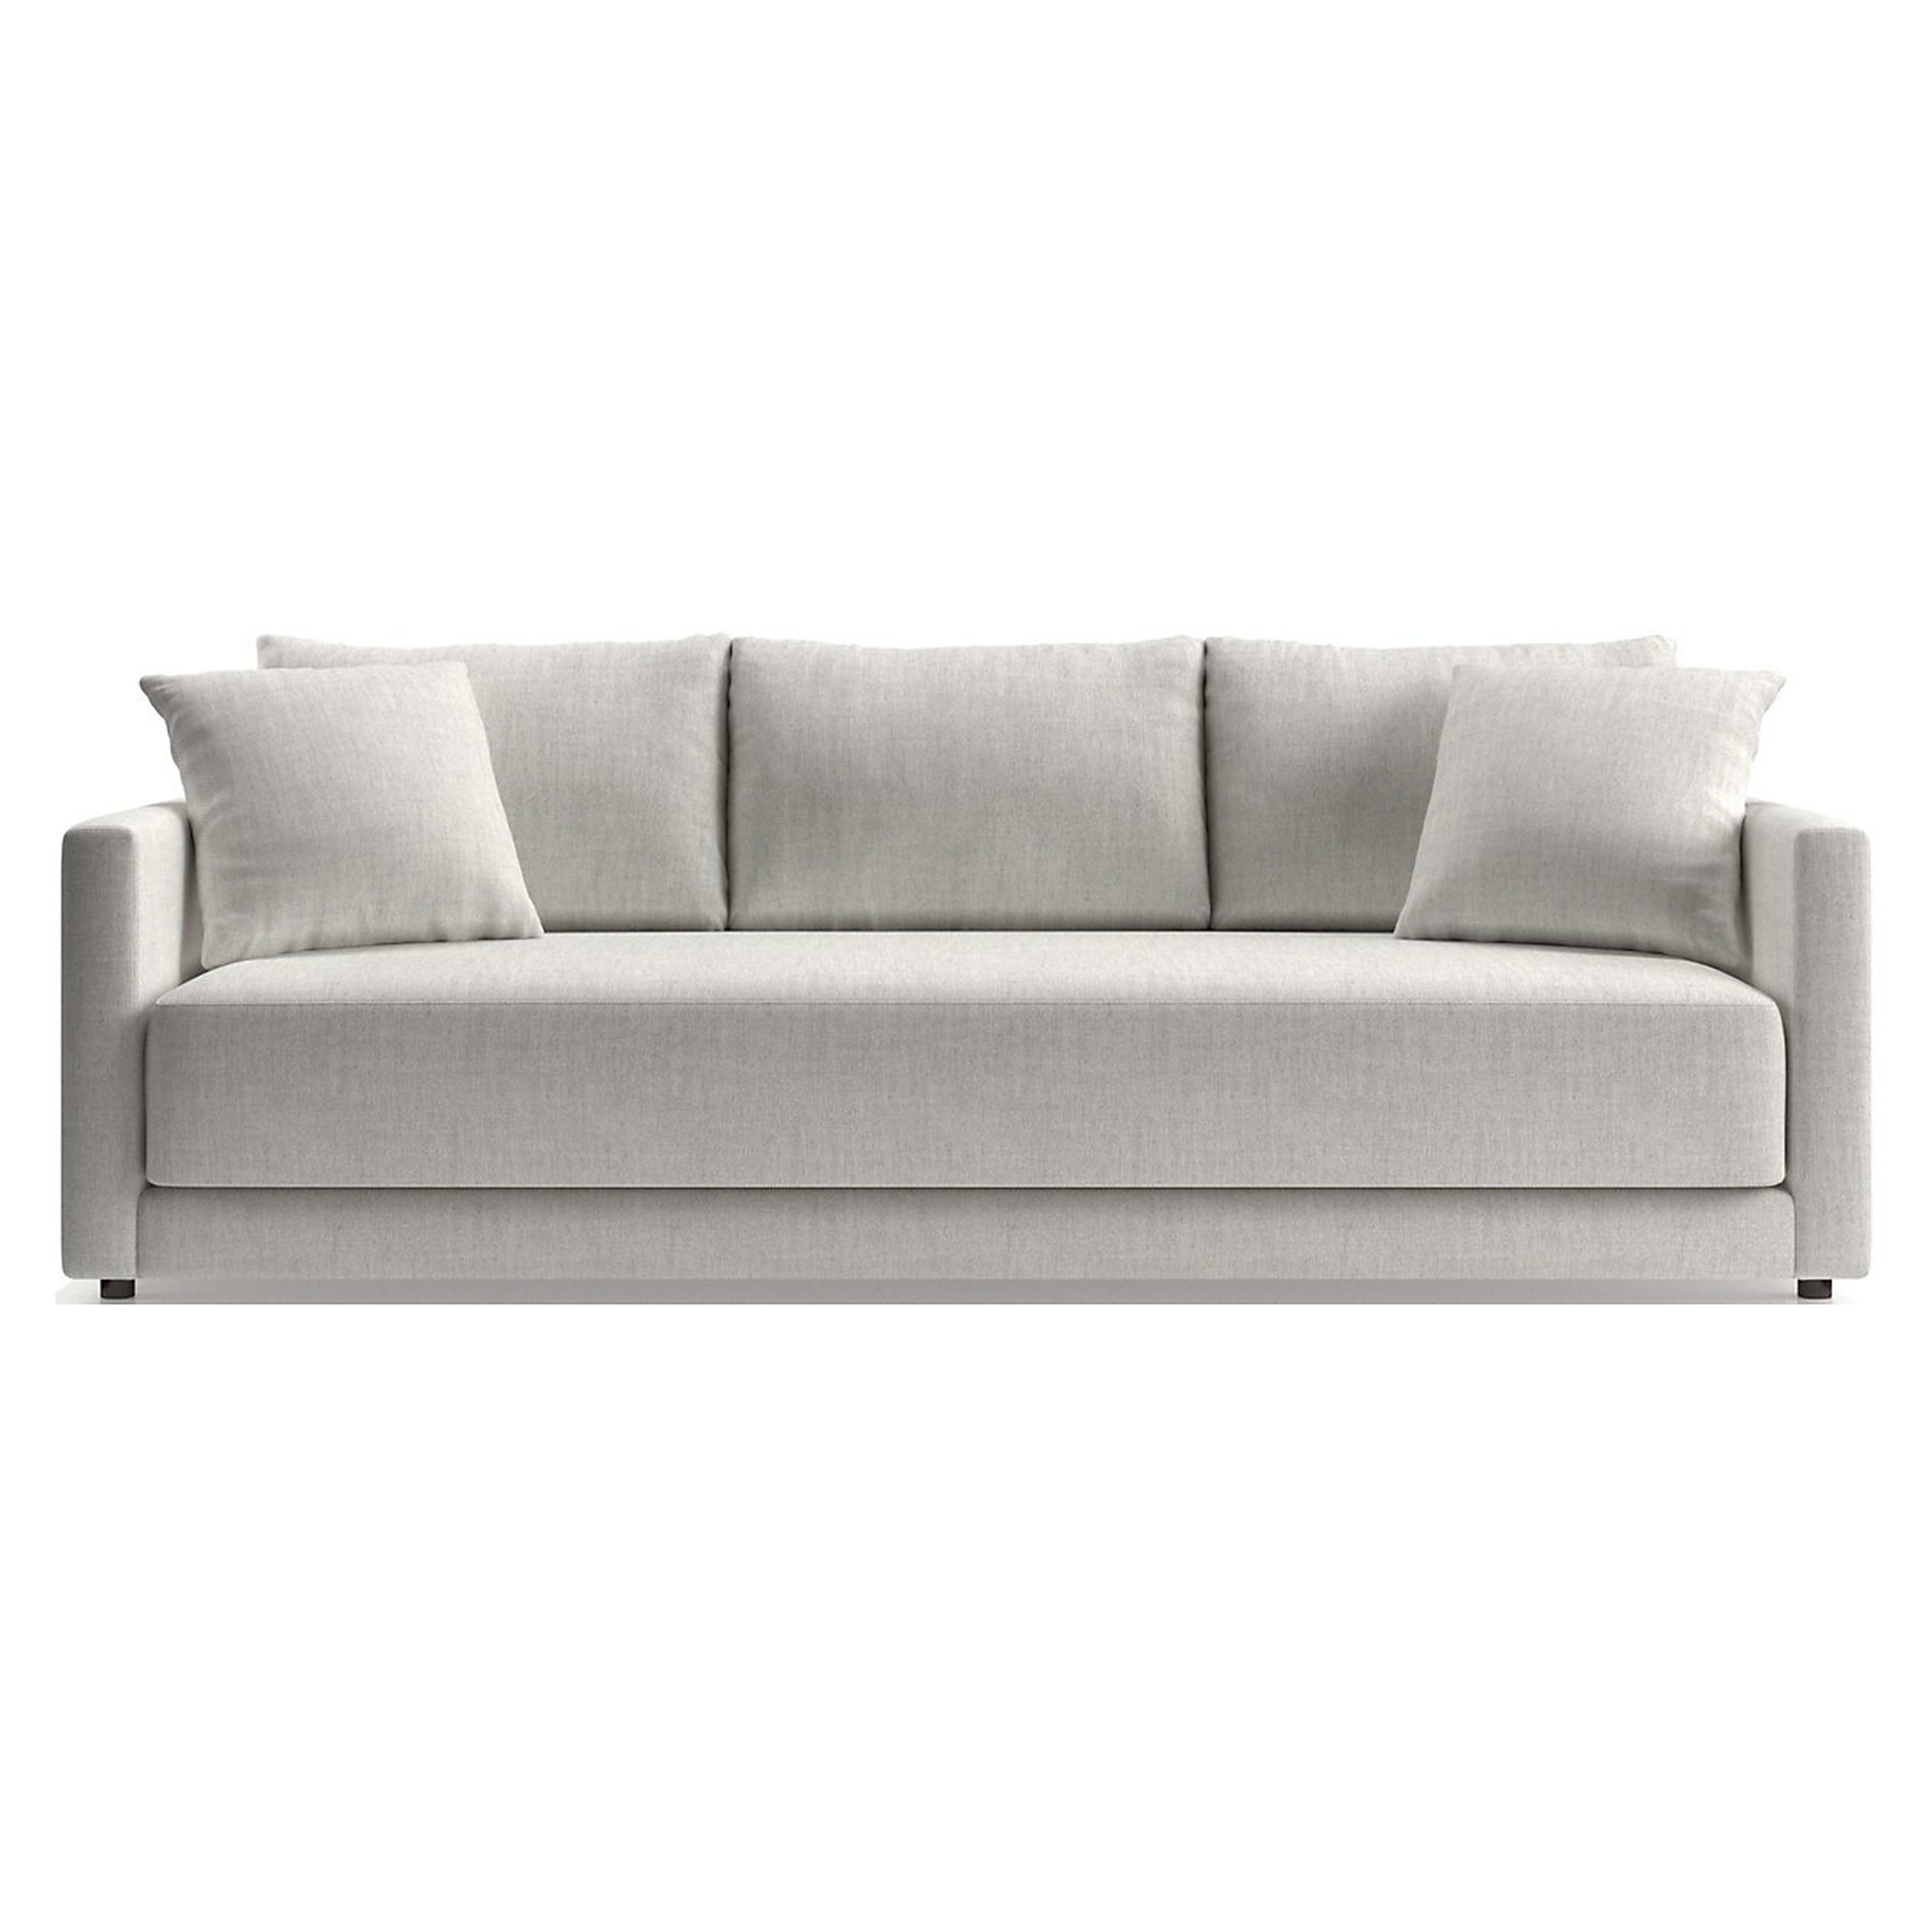 Gather Grande Bench Sofa - Tribute, Sterling - Crate and Barrel